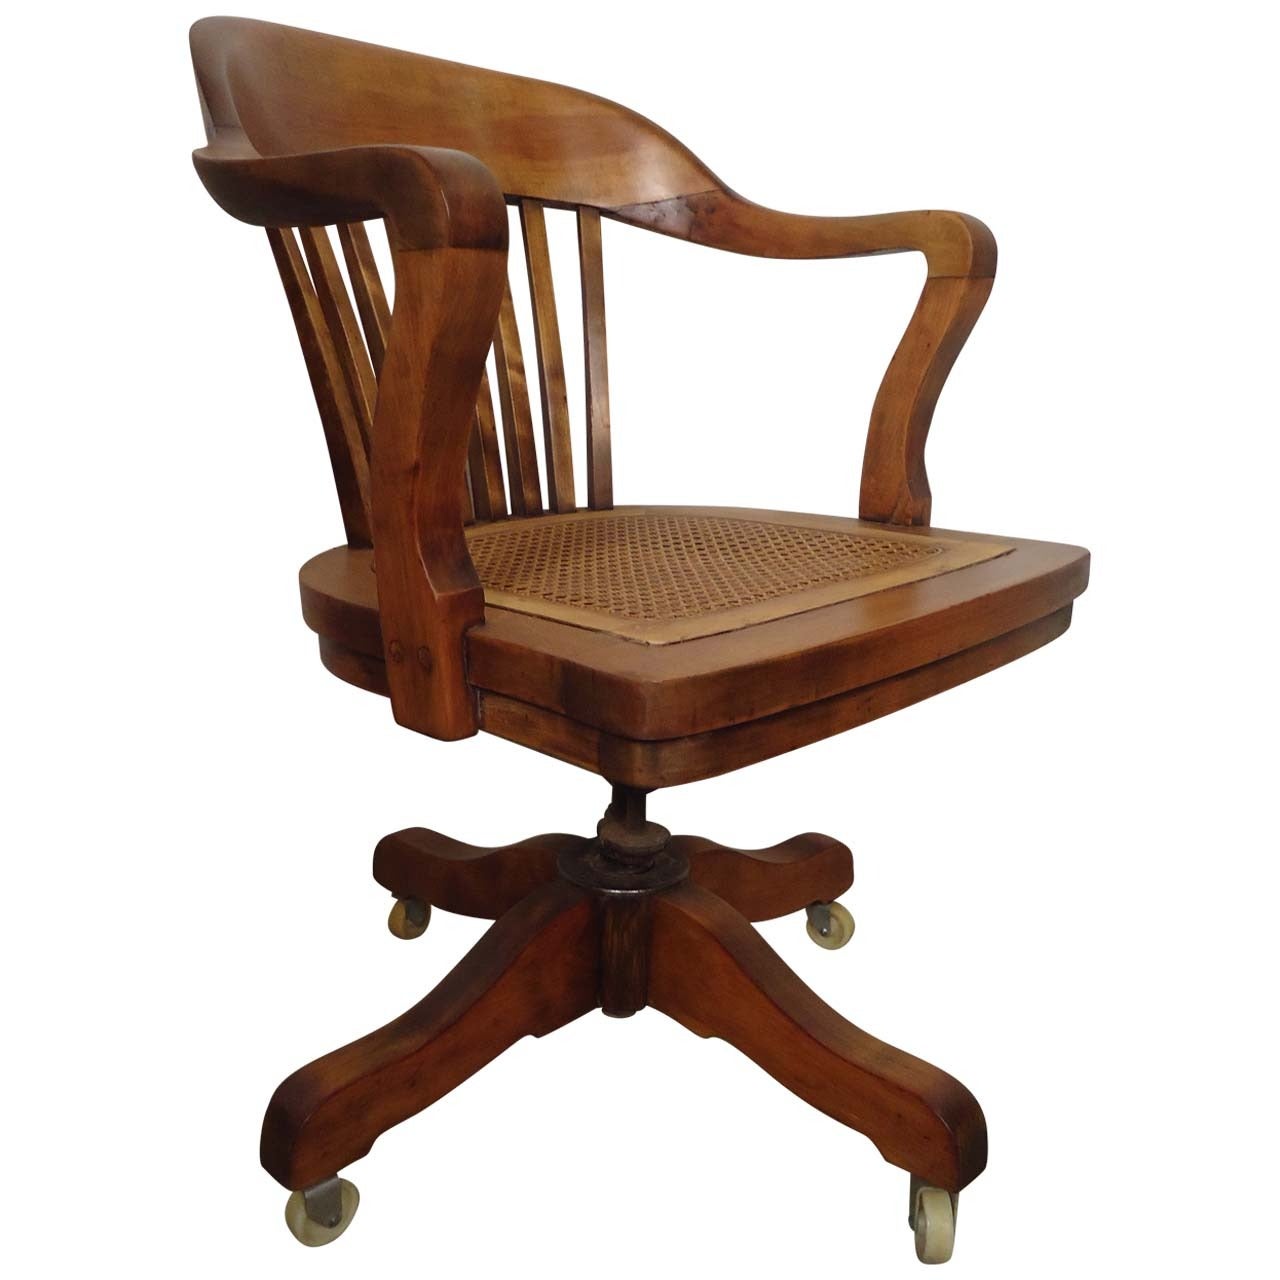 Restored Vintage Swivel Desk Chair By PAGE